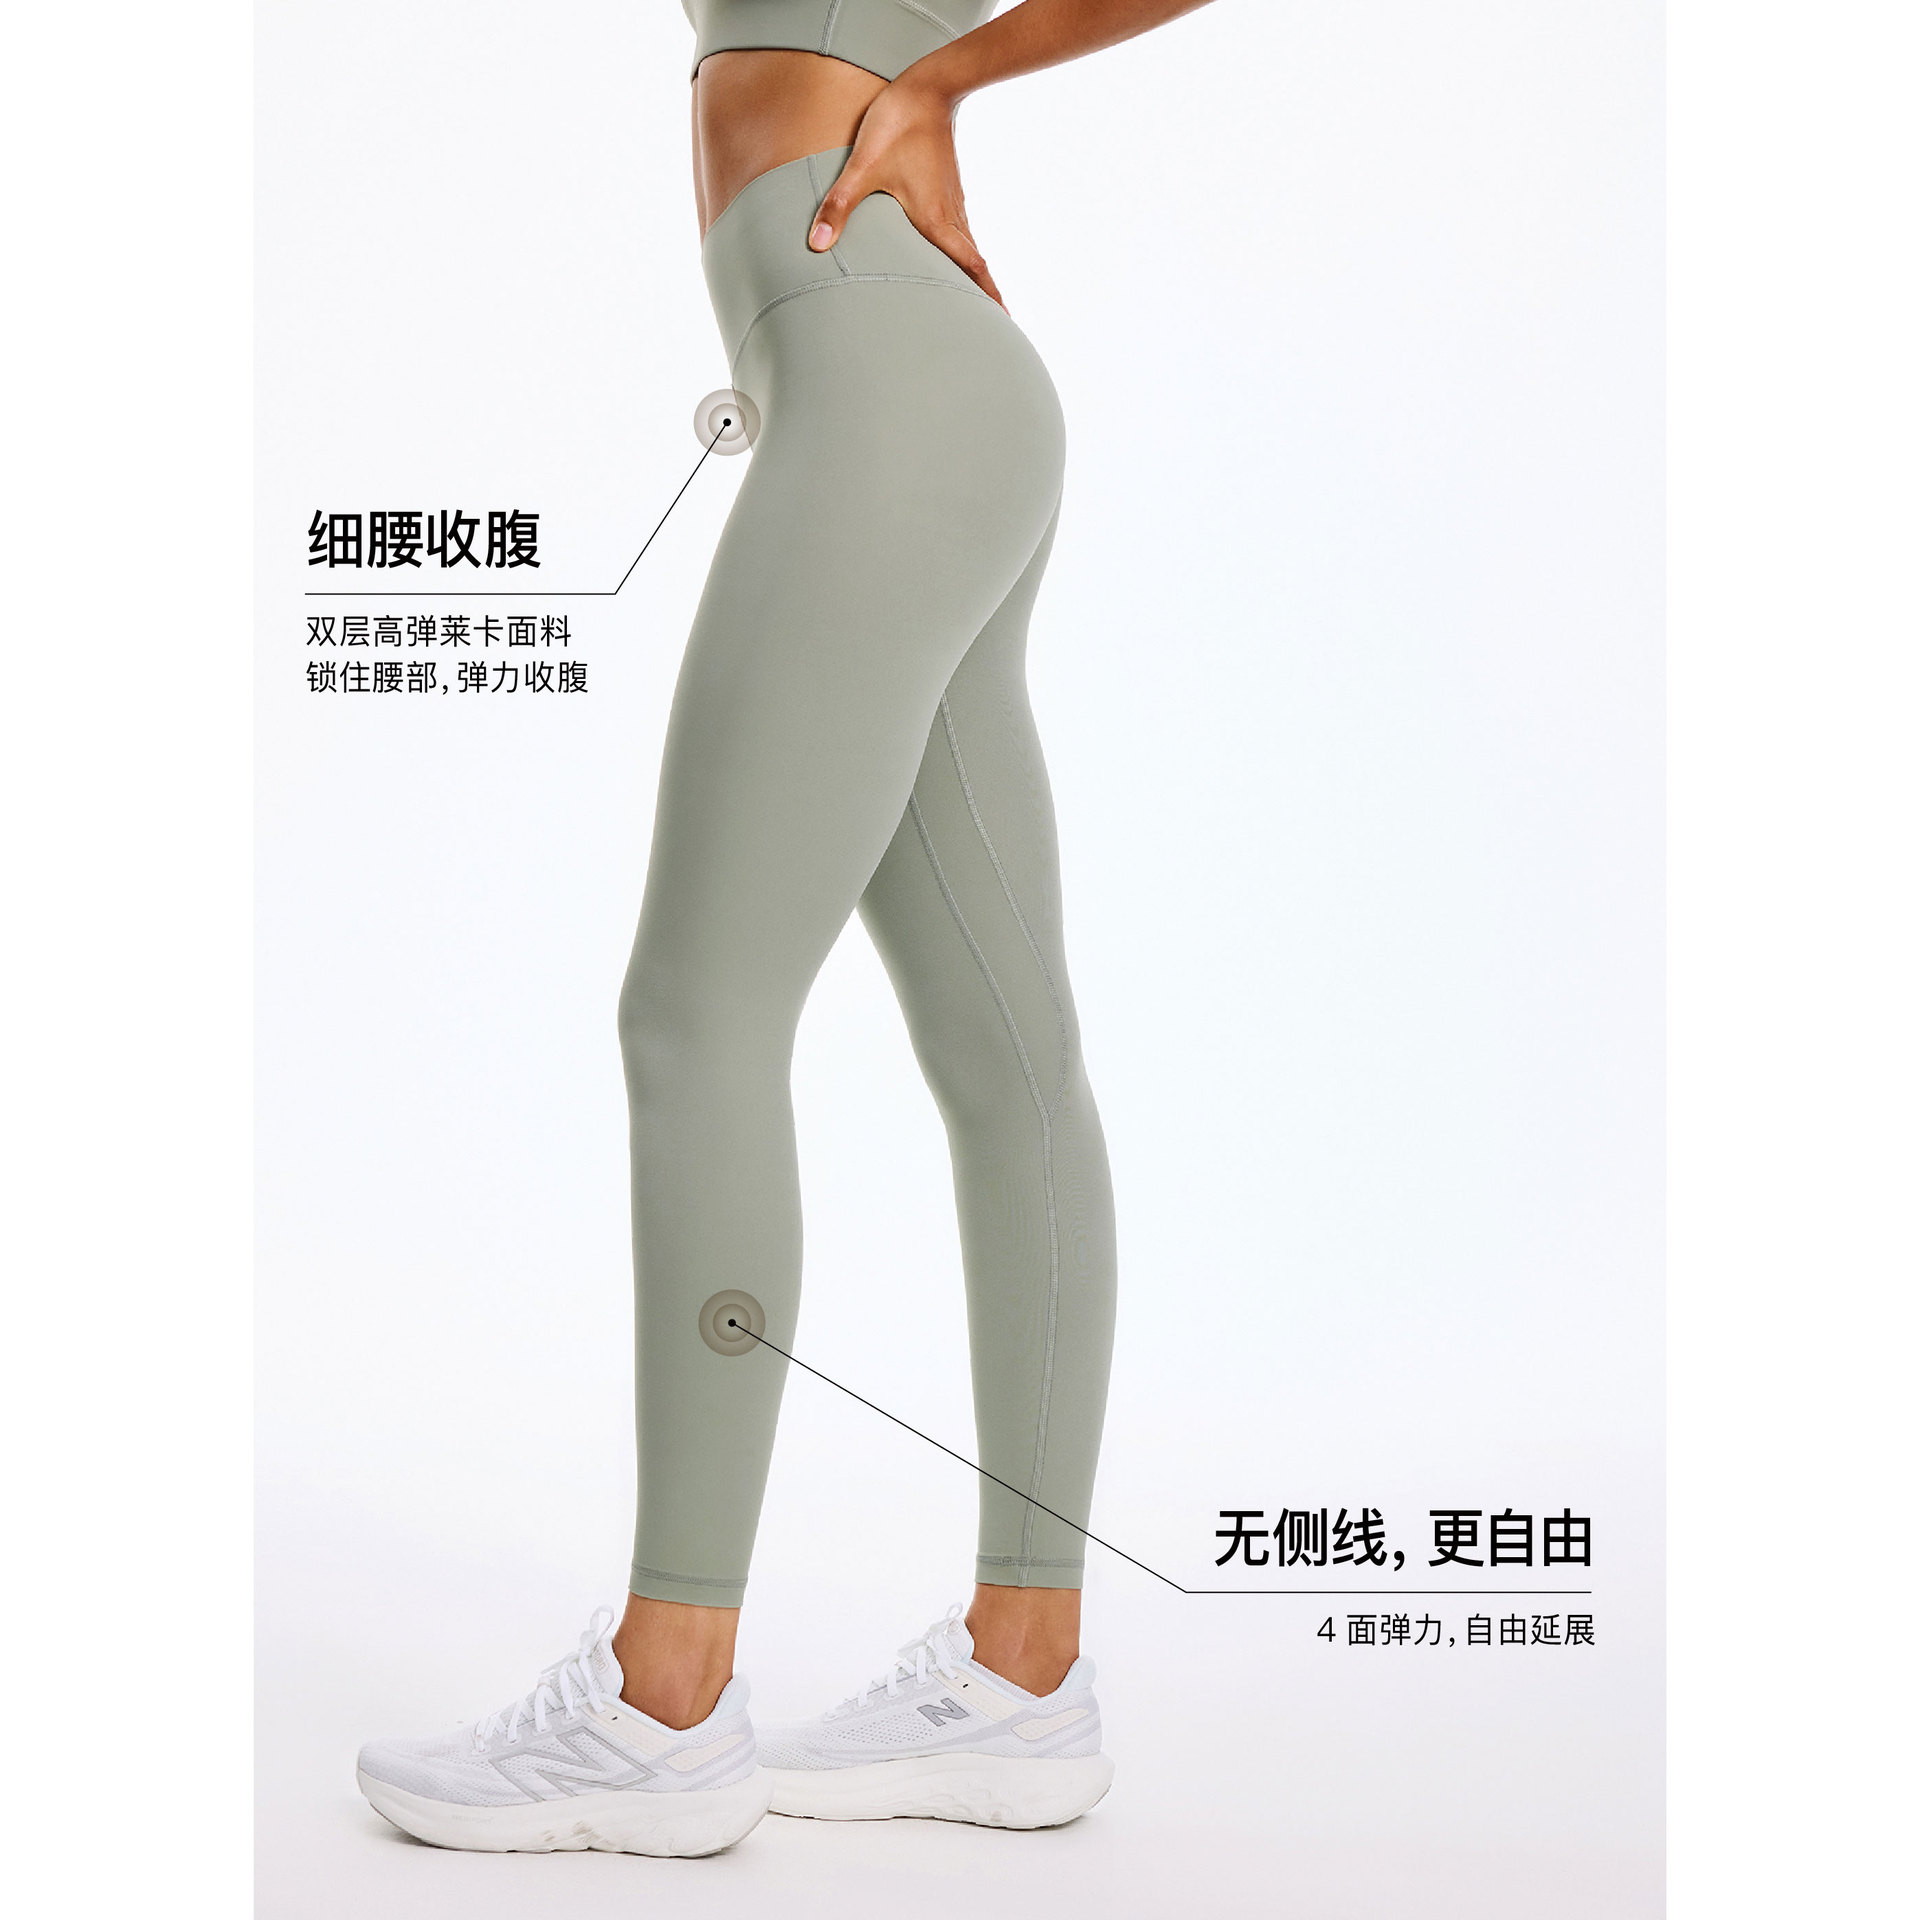 Yoga Clothes Pants No Embarrassment Line Exercise Workout Pants Skinny Hip Raise High Waist Nude Feel and GA Pants for Women